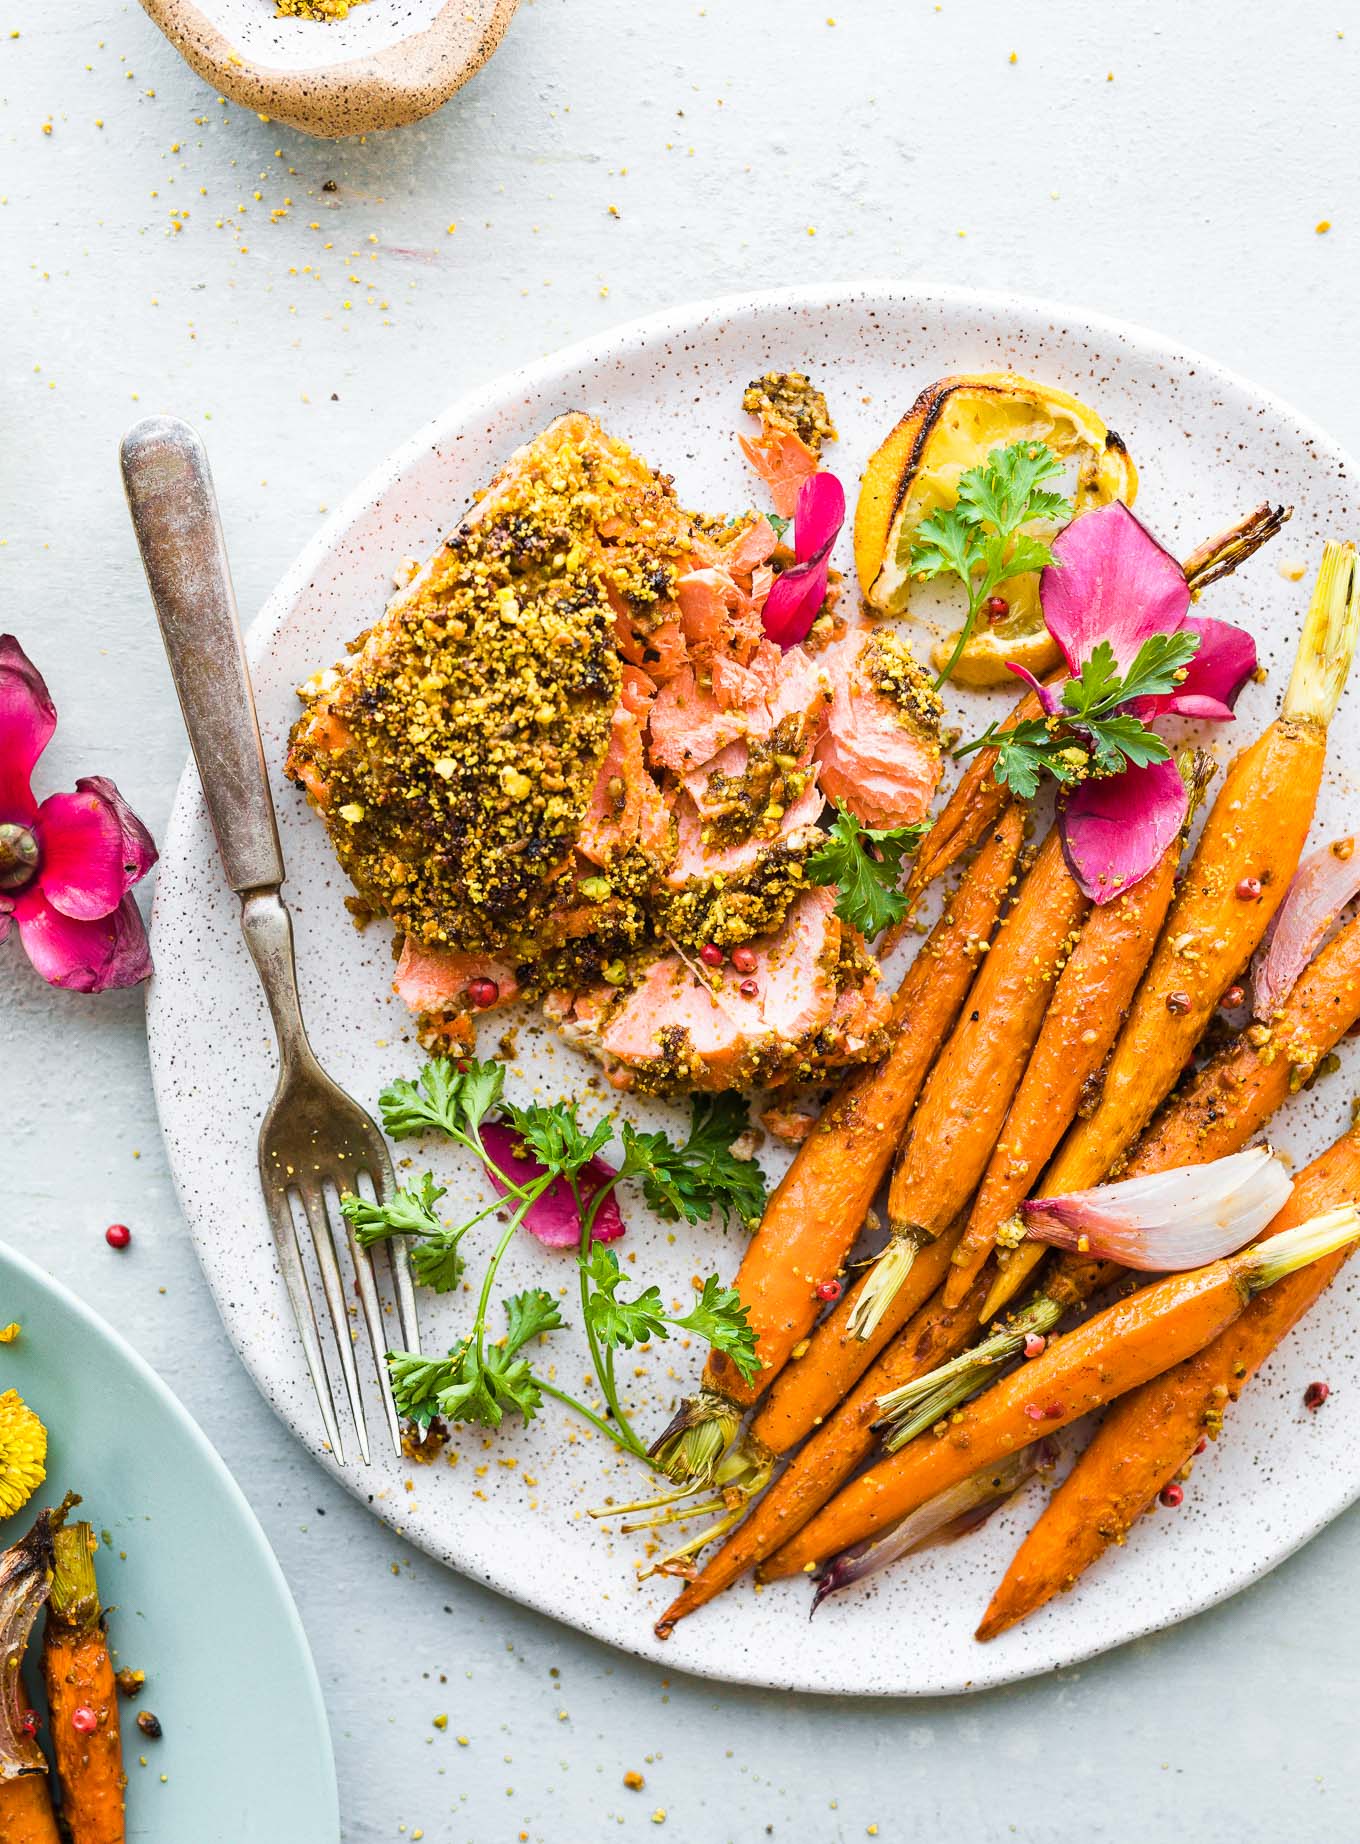 White and brown speckled plate with serving of pistachio crusted salmon fillet, glazed carrots on the side.